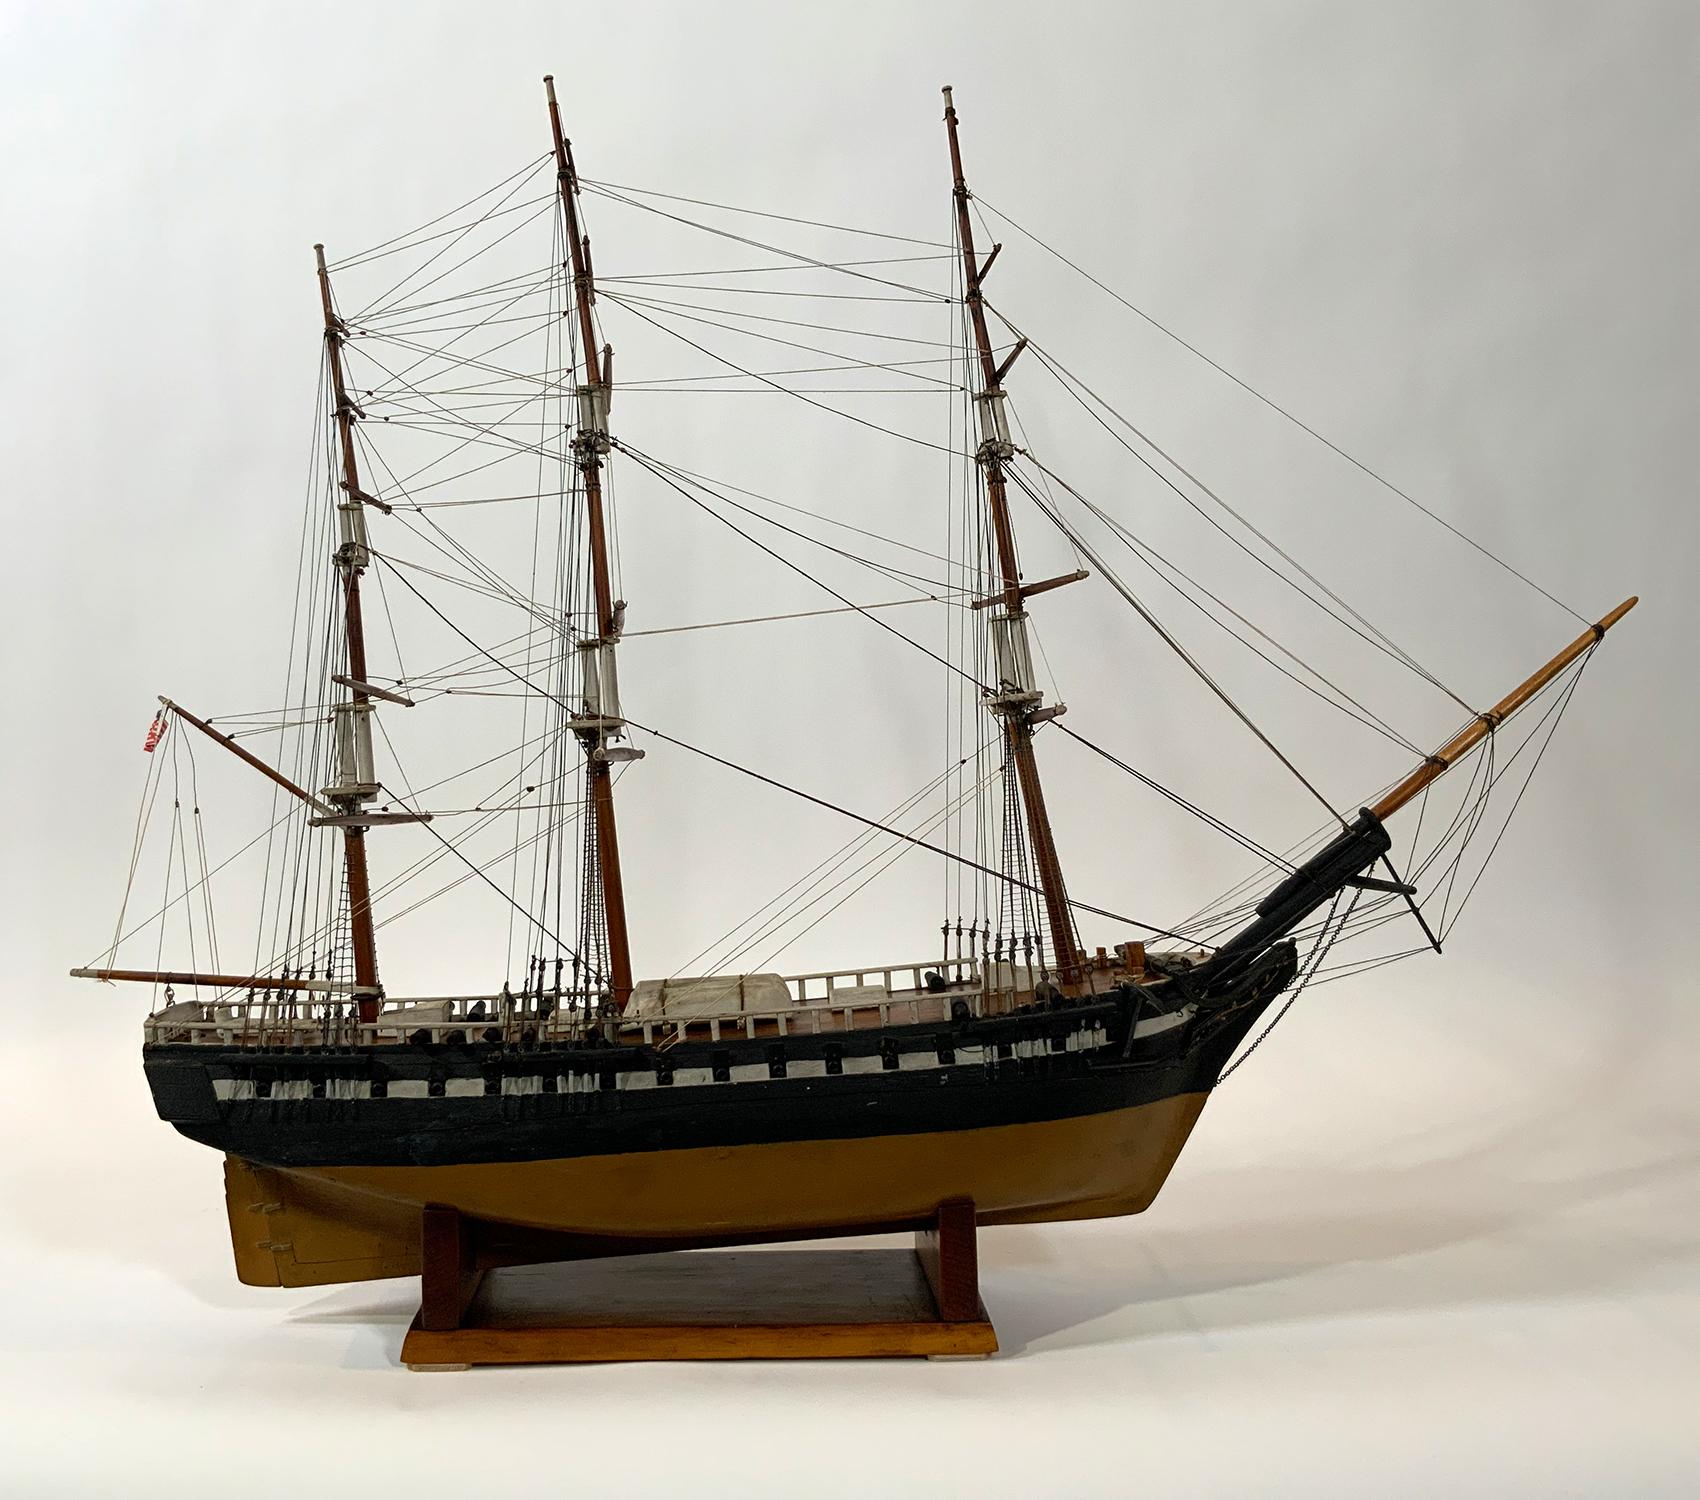 Antique ship model of an American warship. Scribed deck, cabins, hatches, companion way, etc. The model is rigged with full standing and running rigging. Set on a wood cradle.

Weight: 6 LBS
Overall Dimensions: 31” H x 38